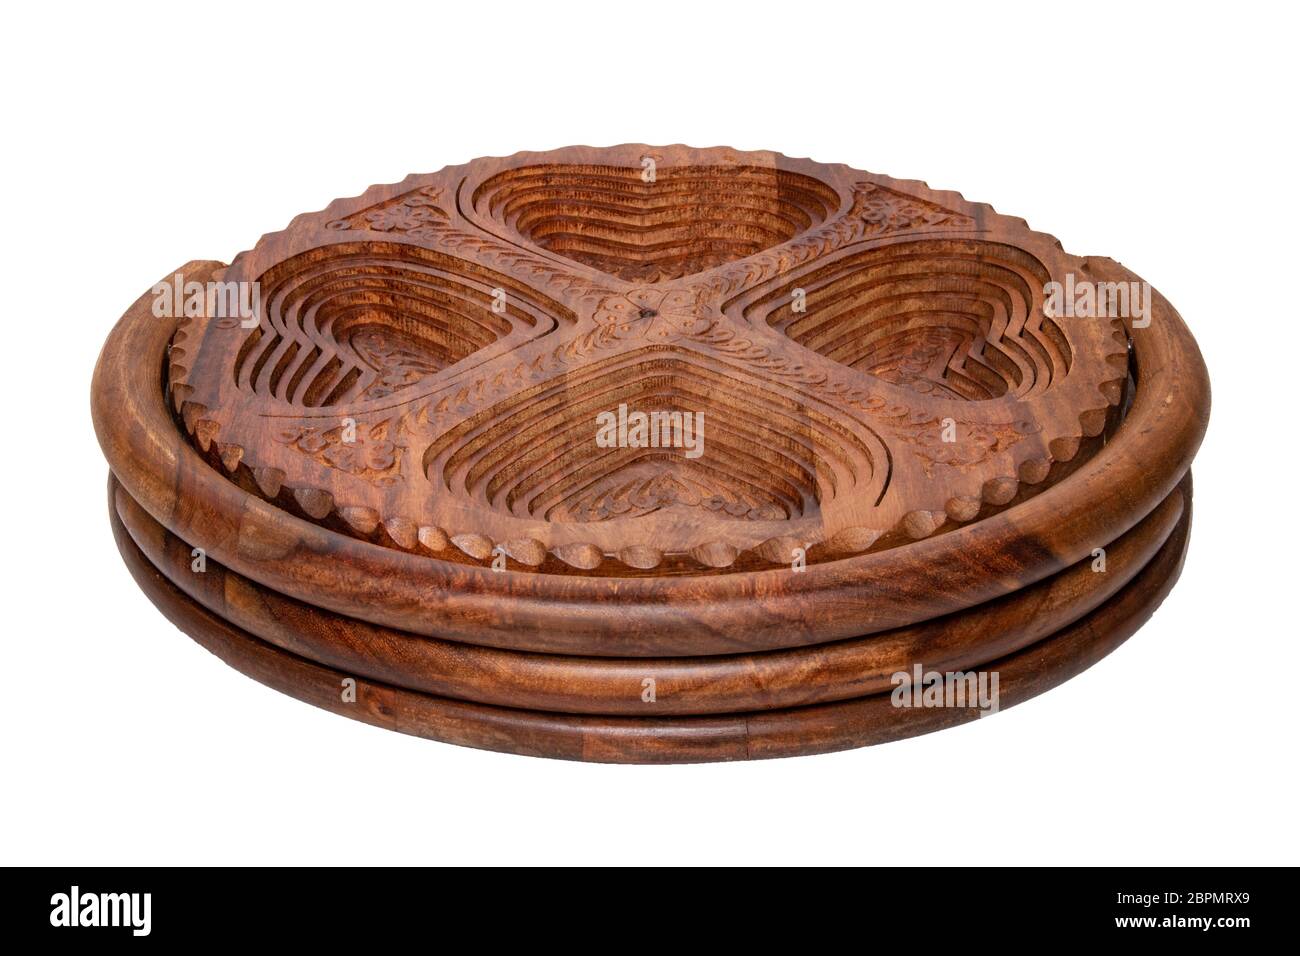 Wooden bowls. Closeup of handmade hinged wooden bowl for fruits, vegetables  and nuts isolated on a white background. Decorative souvenir from Malaysia  Stock Photo - Alamy